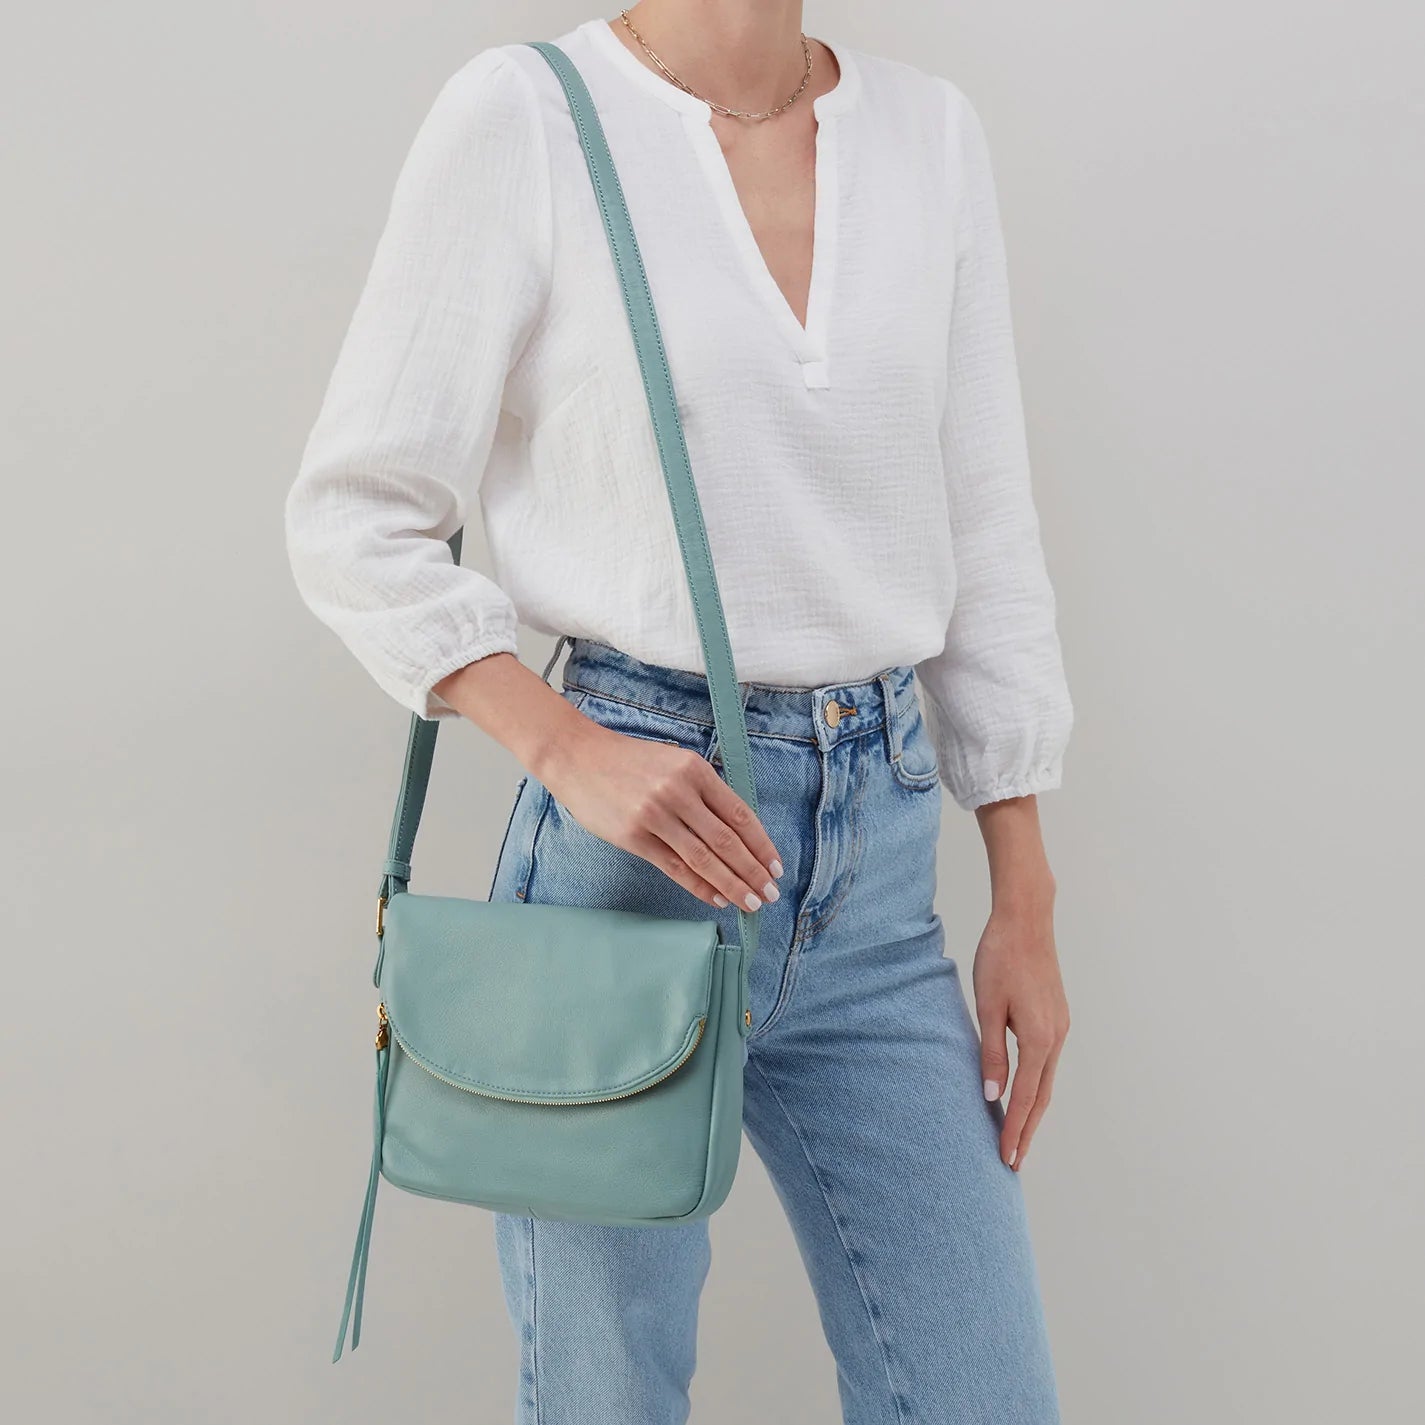 Moda Luxe Brooks Crossbody Bag- everything about this was AMAZING